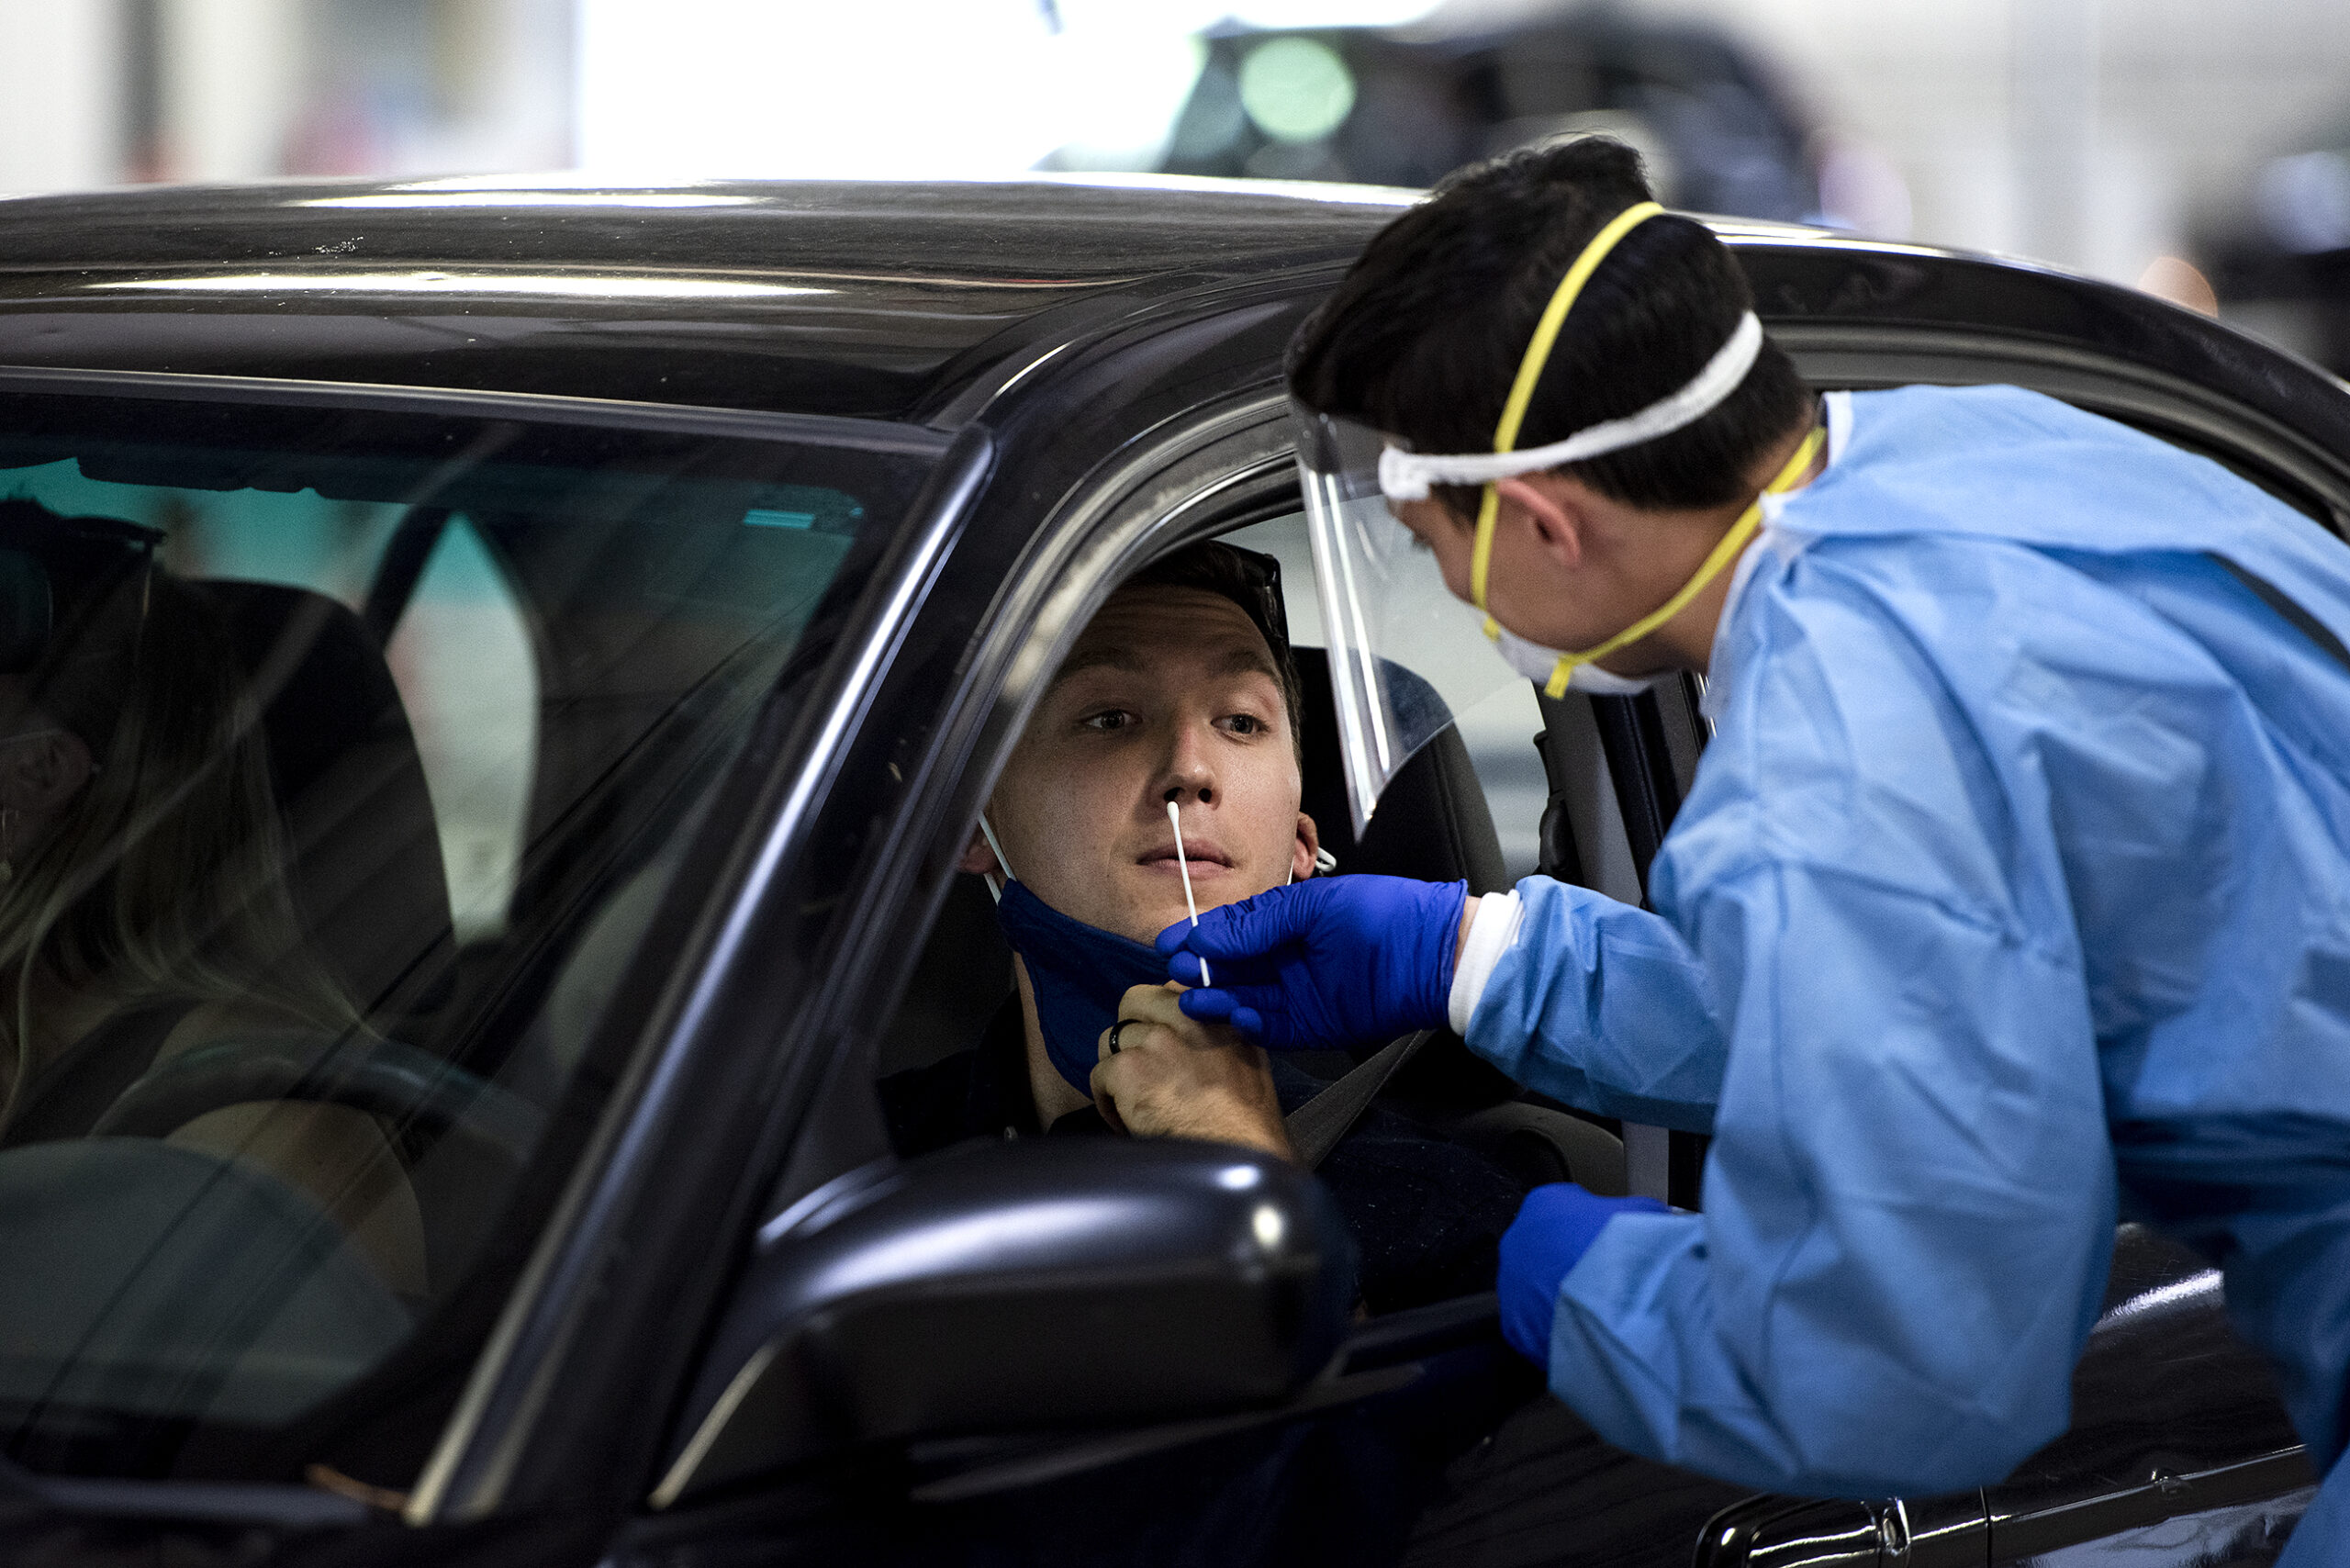 a man remains in his car as a white swab is inserted into his nose by a man in a blue medical gown and gloves